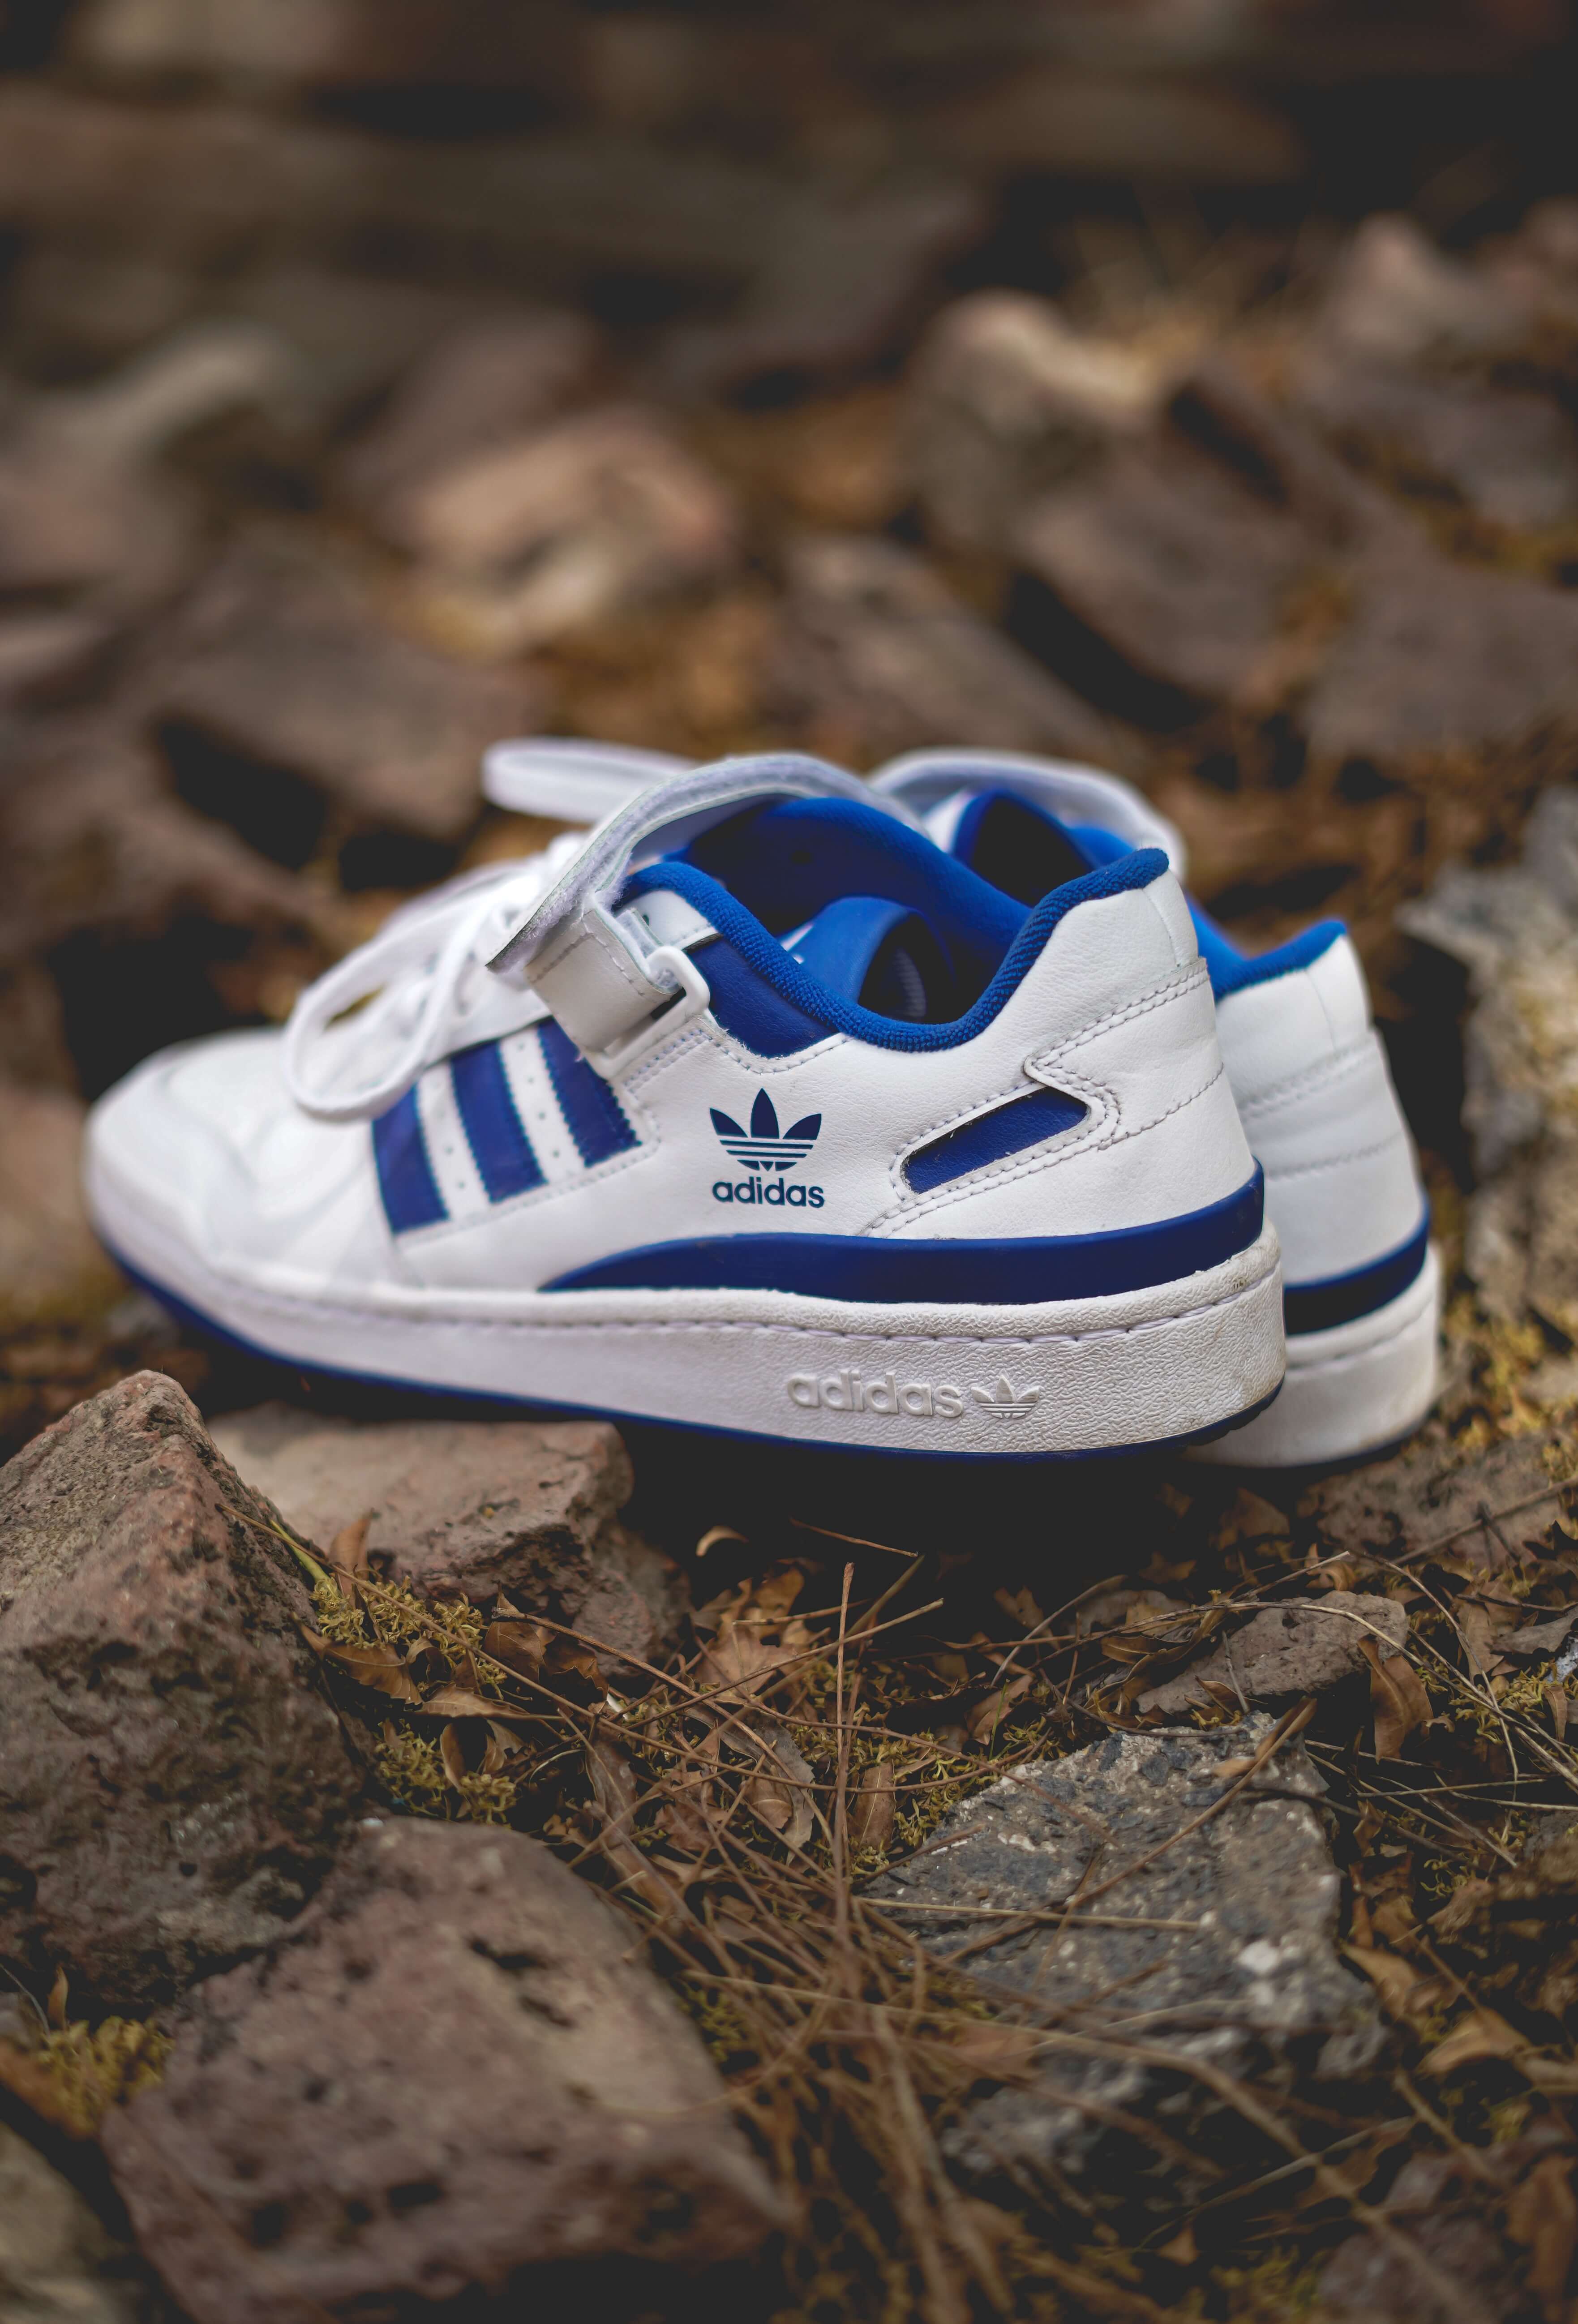 Blue and white ADIDAS trainers on the ground